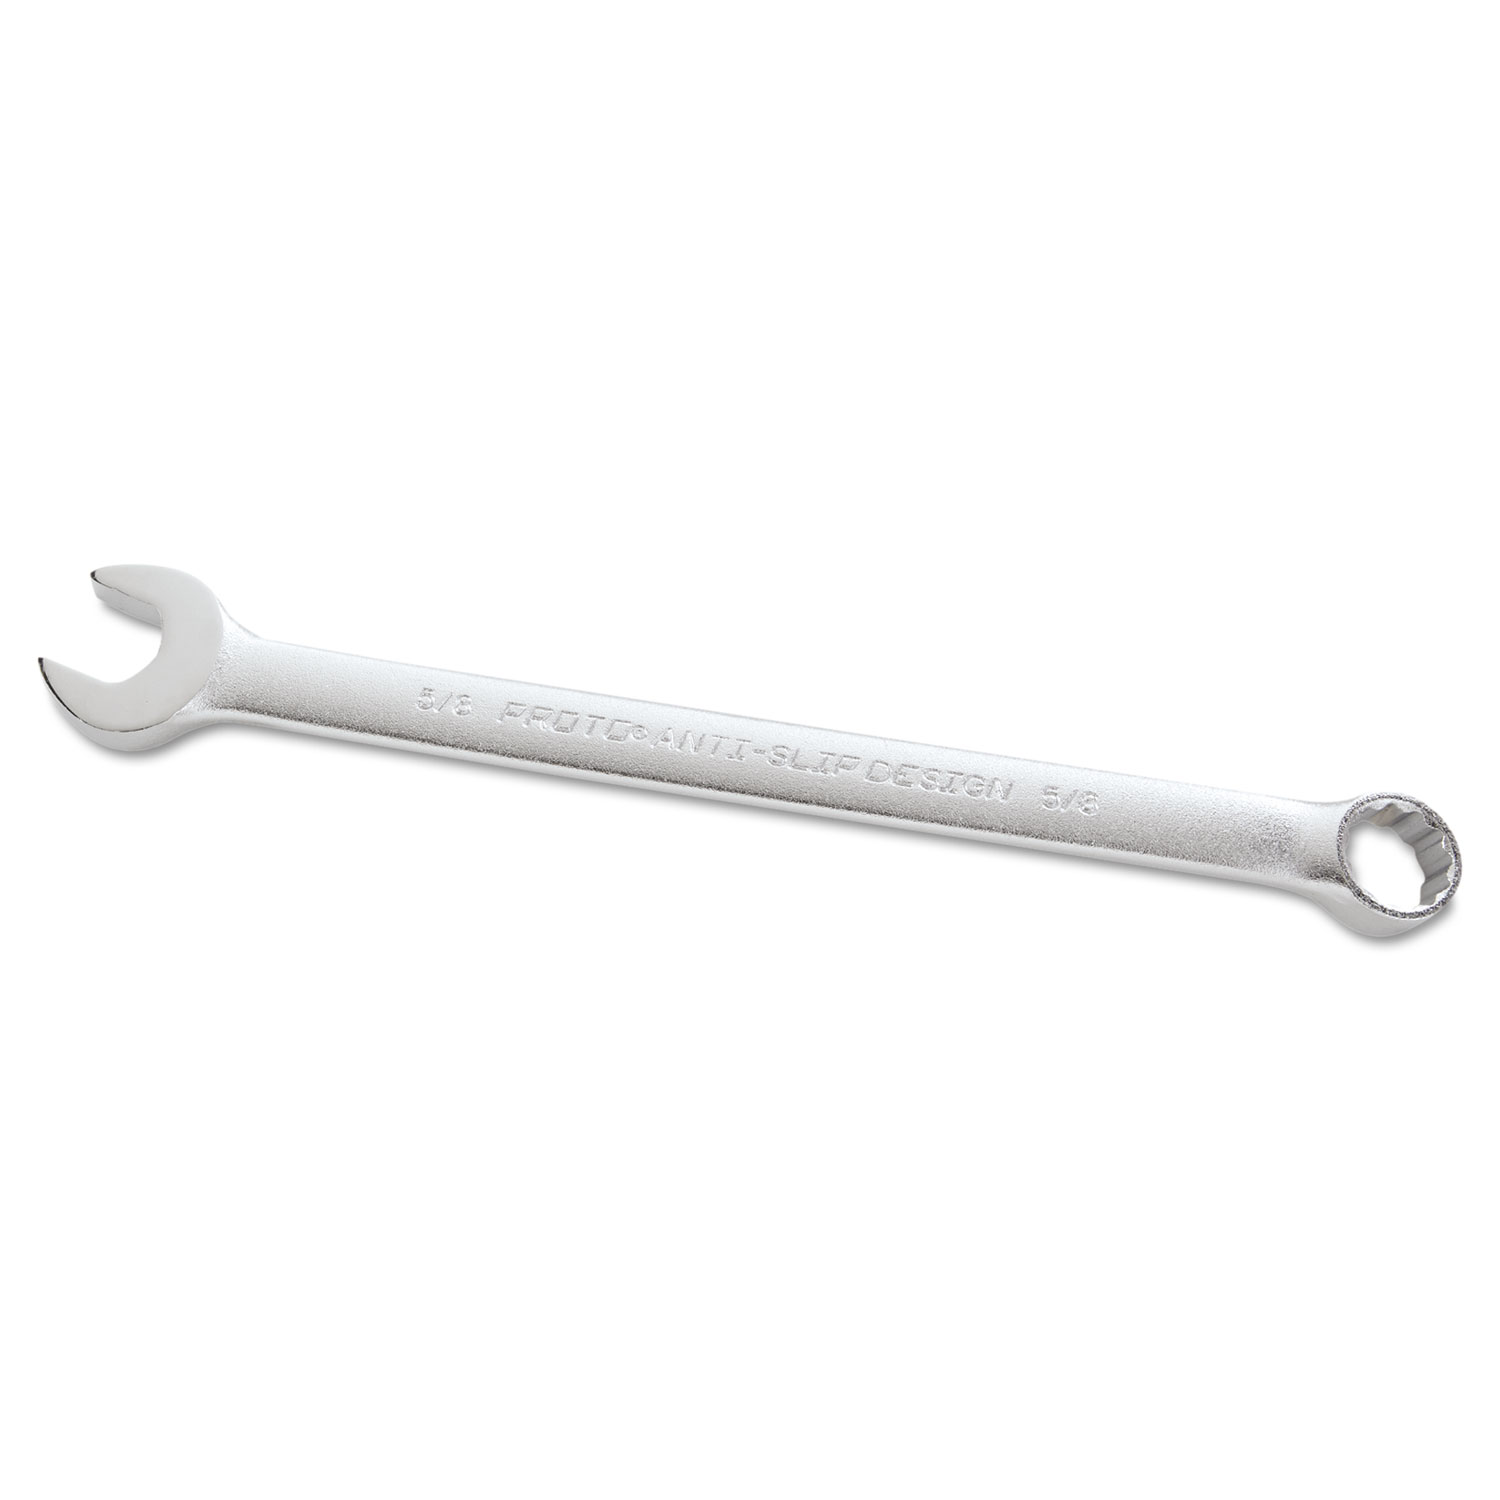 Torqueplus 12-Point Combination Wrench, 5/8 Opening, Satin Finish